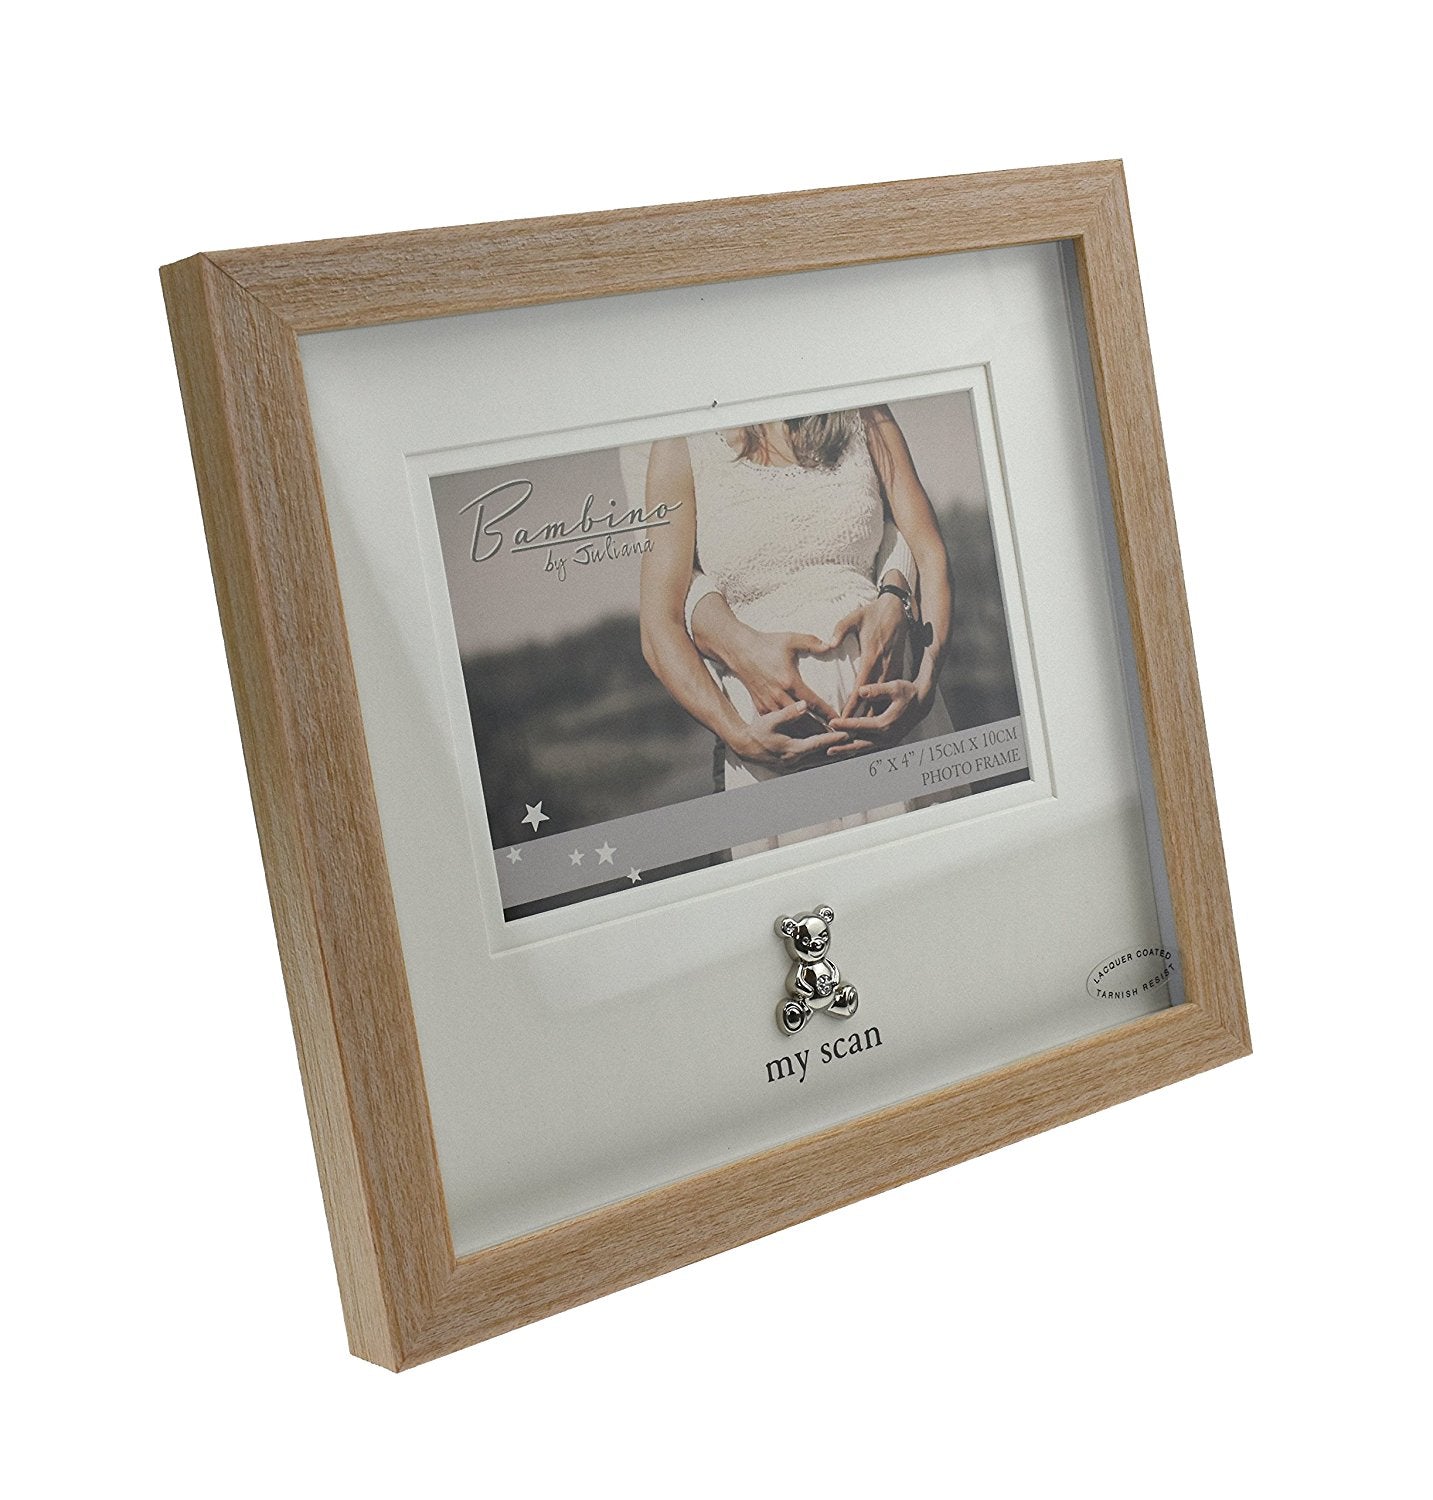 Bambino Light Wooden effect "My Scan"Picture Frame with Silver Pram Icon 6" x 4" - hanrattycraftsgifts.co.uk